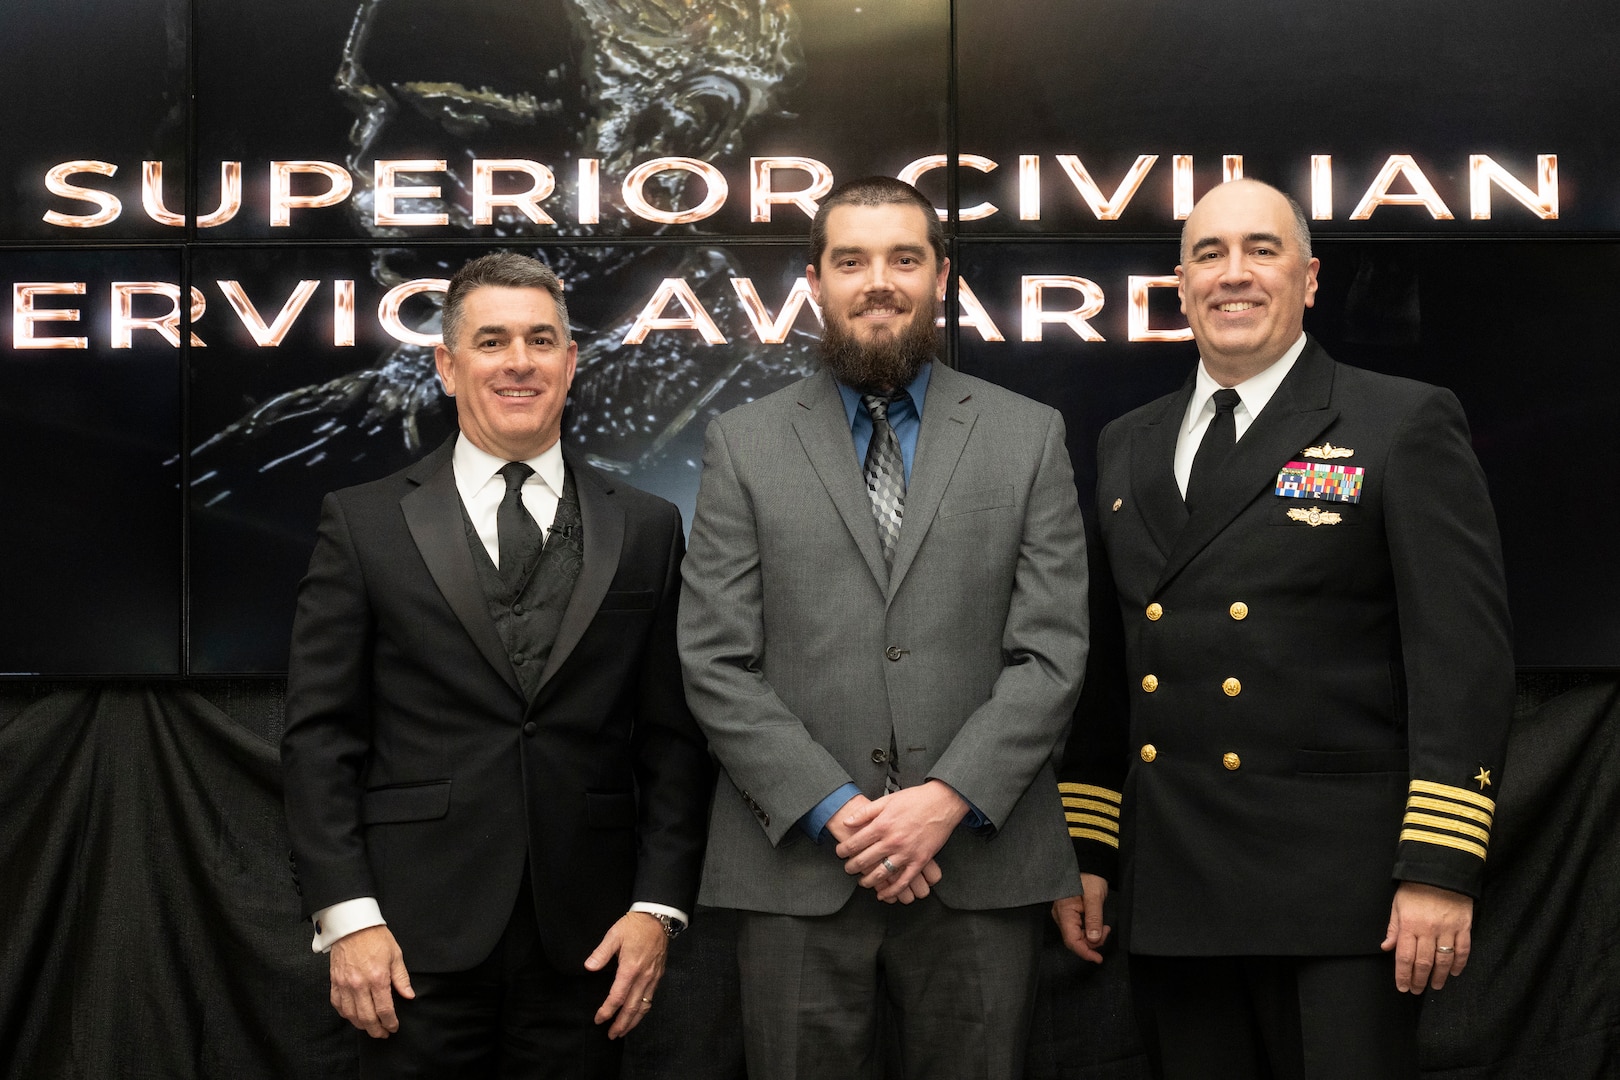 IMAGE: Naval Surface Warfare Center Dahlgren Division (NSWCDD) Technical Director Dale Sisson Jr., SES, and Commanding Officer Capt. Philip Mlynarski presented Daniel Belcher with the Navy Meritorious Civilian Service Award during the NSWCDD Annual Honorary Awards ceremony at the Fredericksburg Expo & Conference Center March 10.